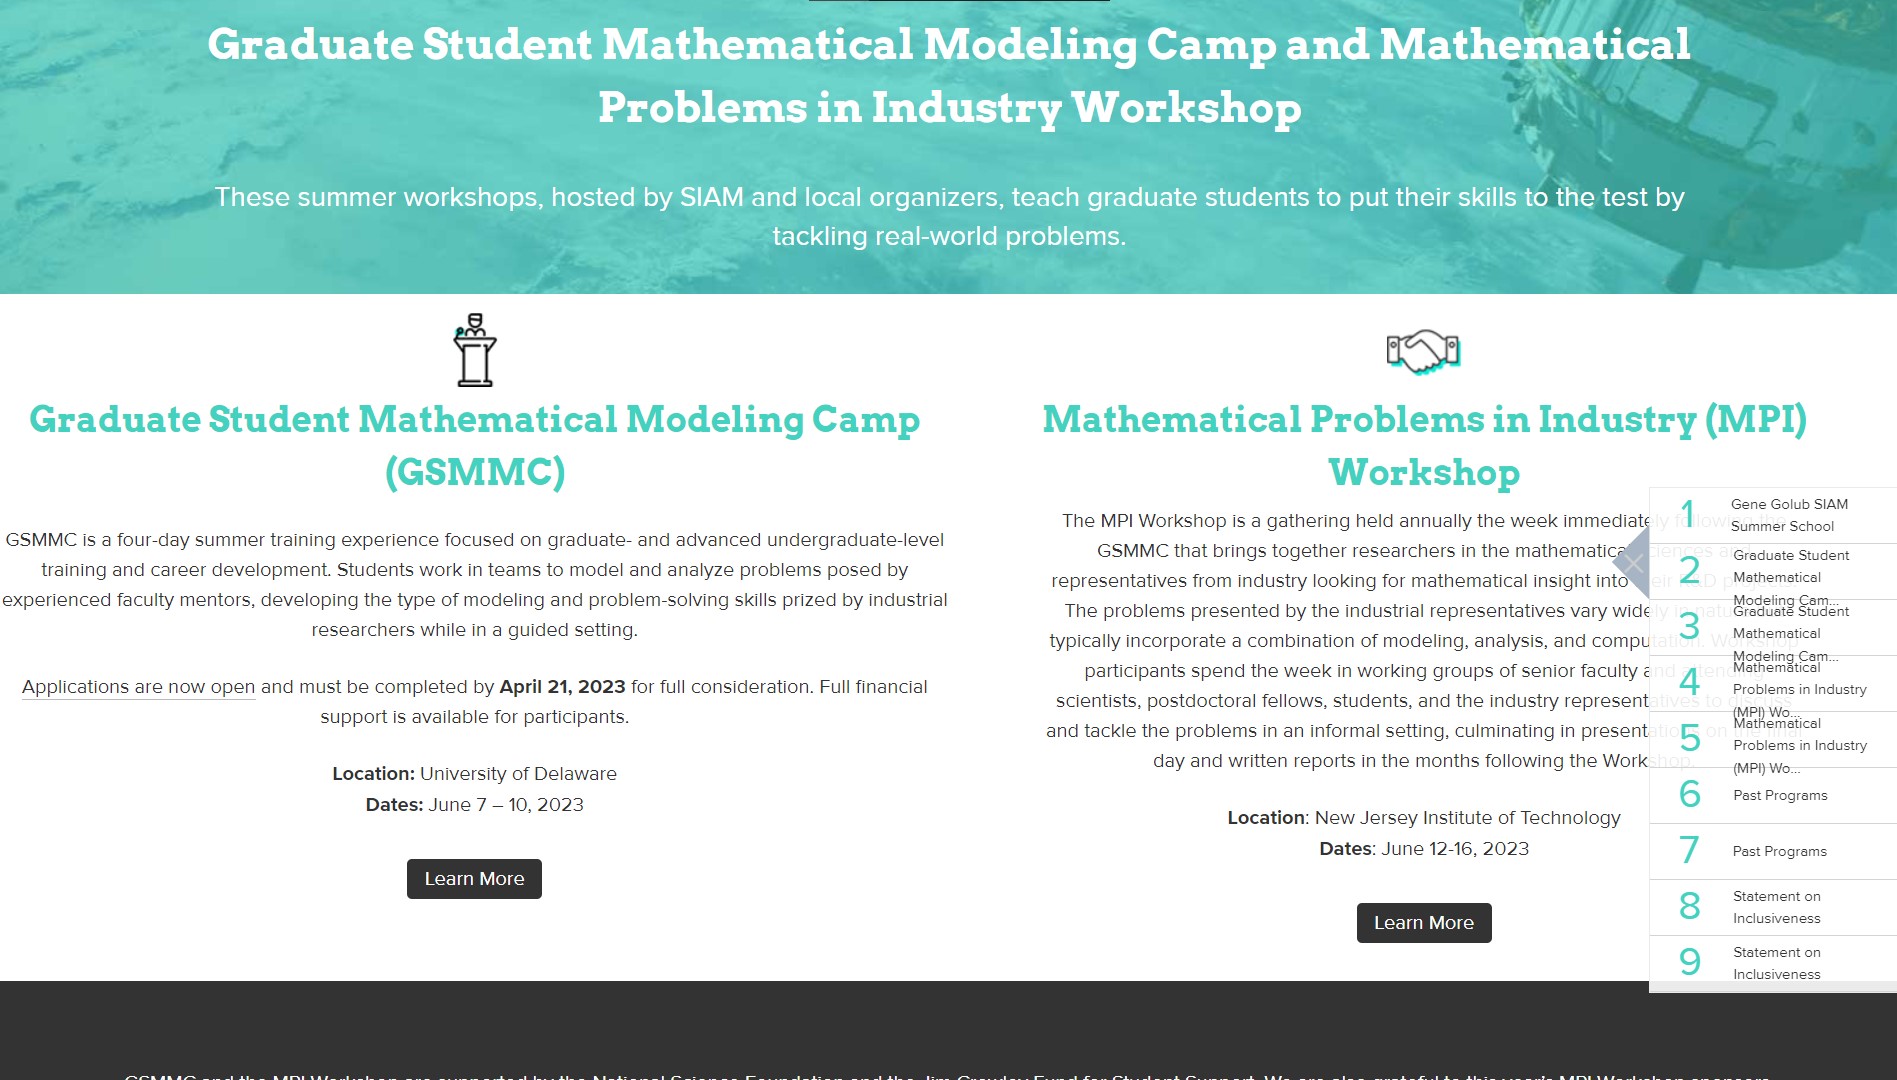 Apply Now for the Graduate Student Math Modeling Camp 2023